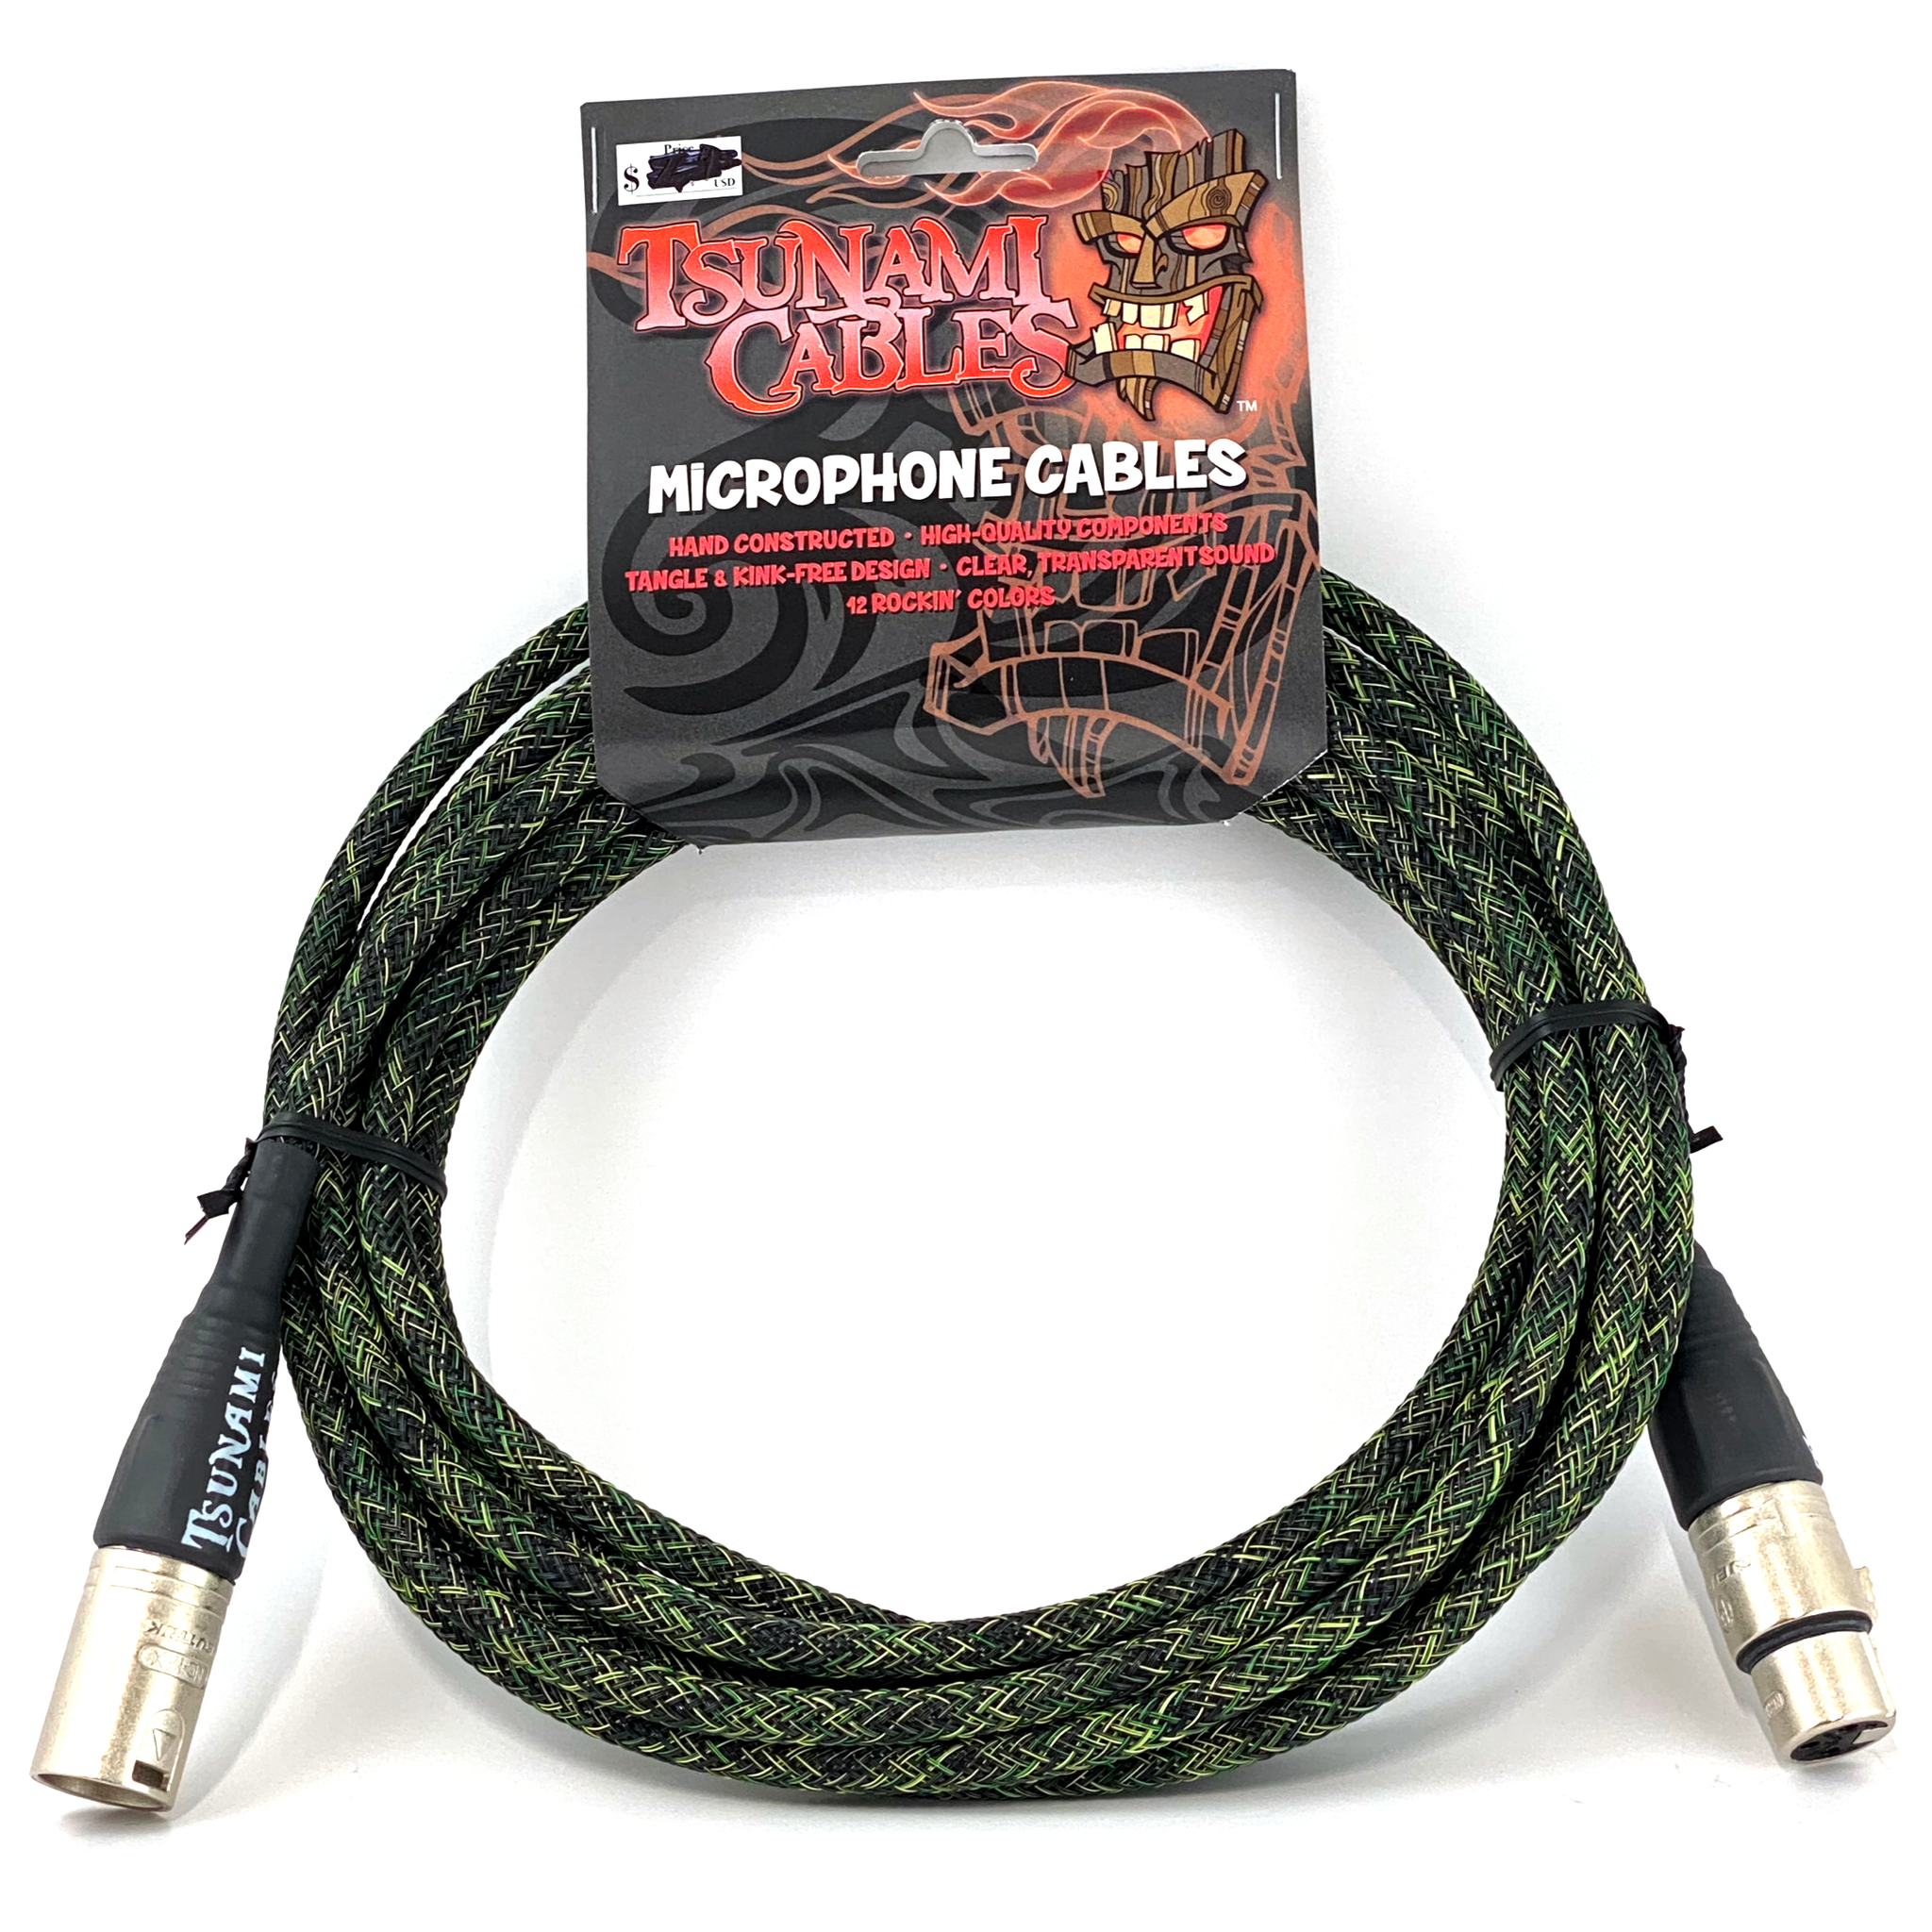 Tsunami Cables 15' Handcrafted Premium Microphone XLR Cable "Camo" (Camouflage Green)